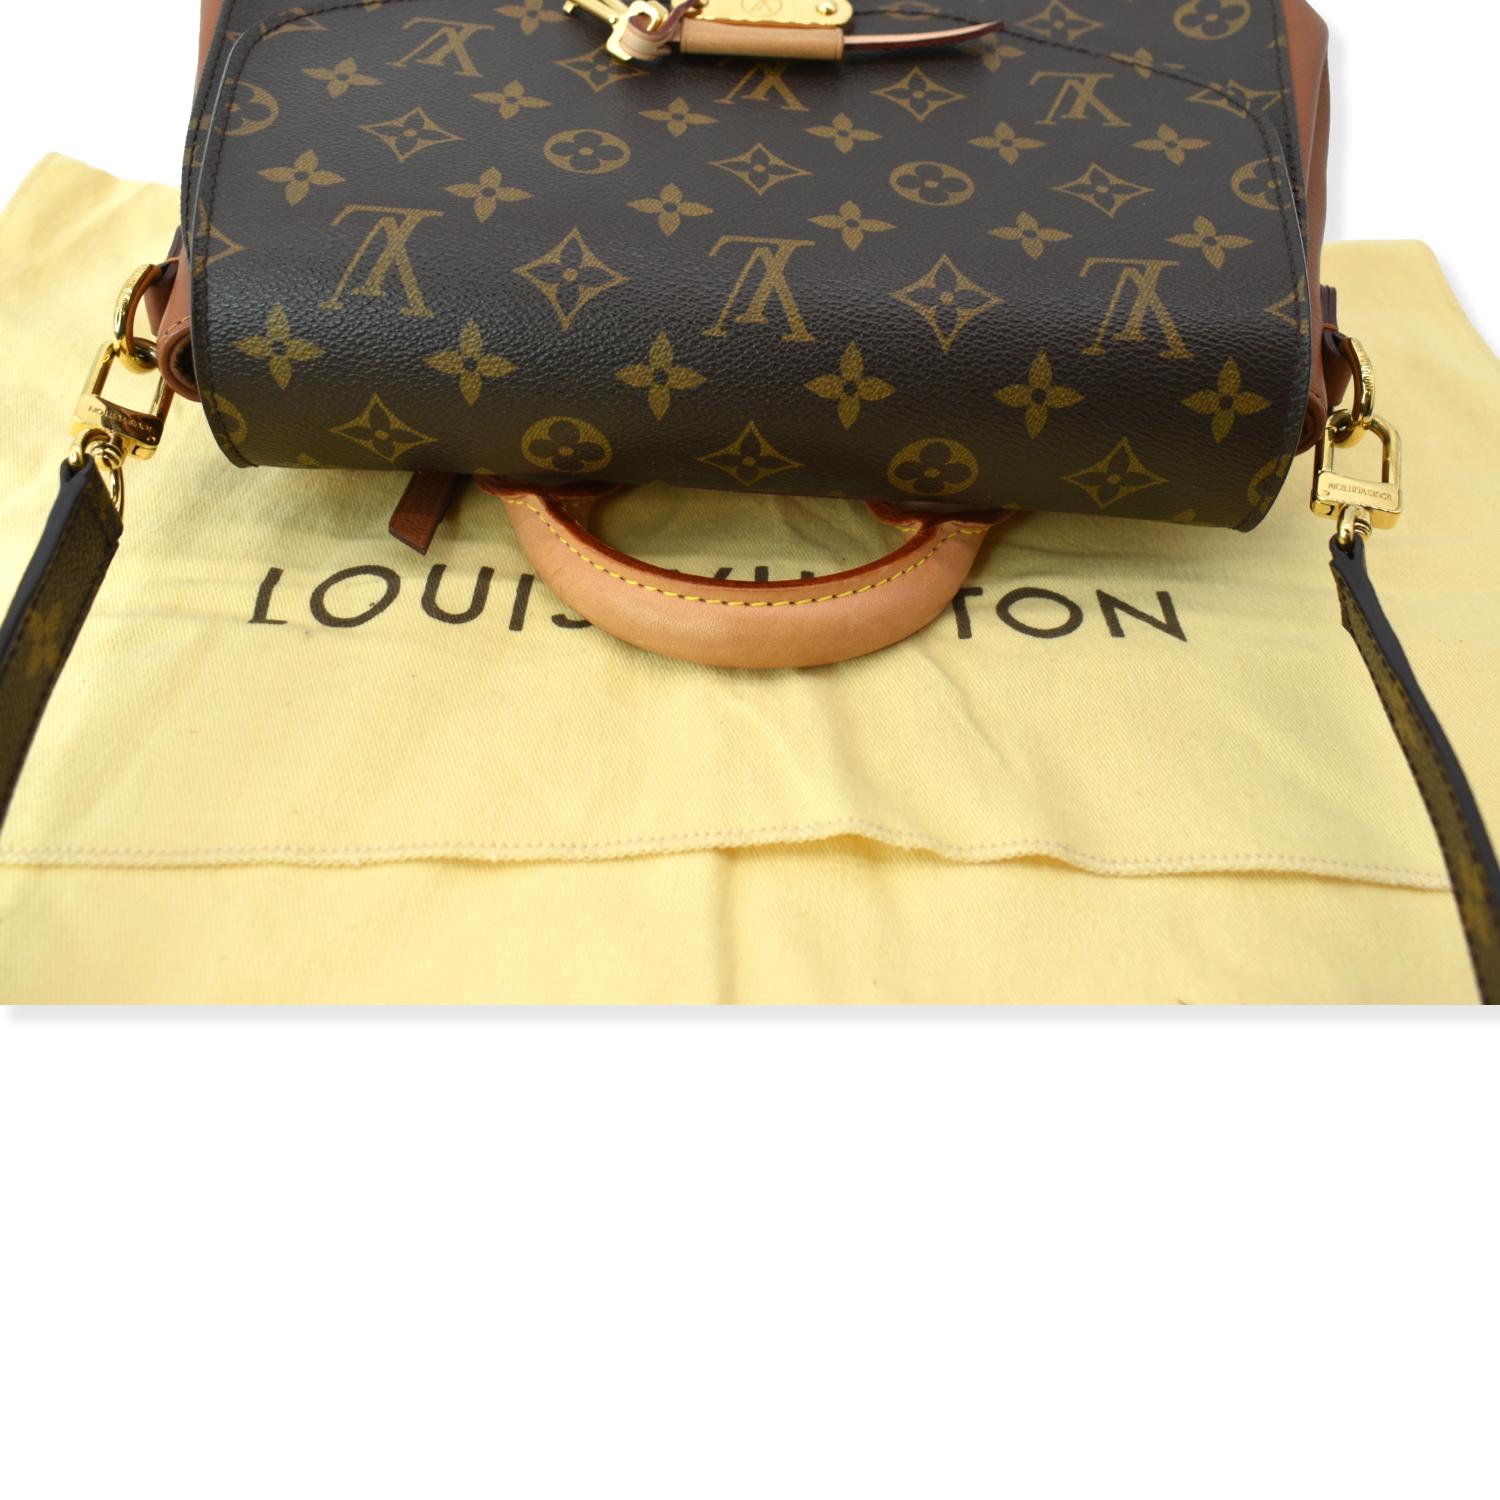 LOUIS VUITTON LV Limited Edition Brown Gold Perlee Bead Evening Shoulder Bag